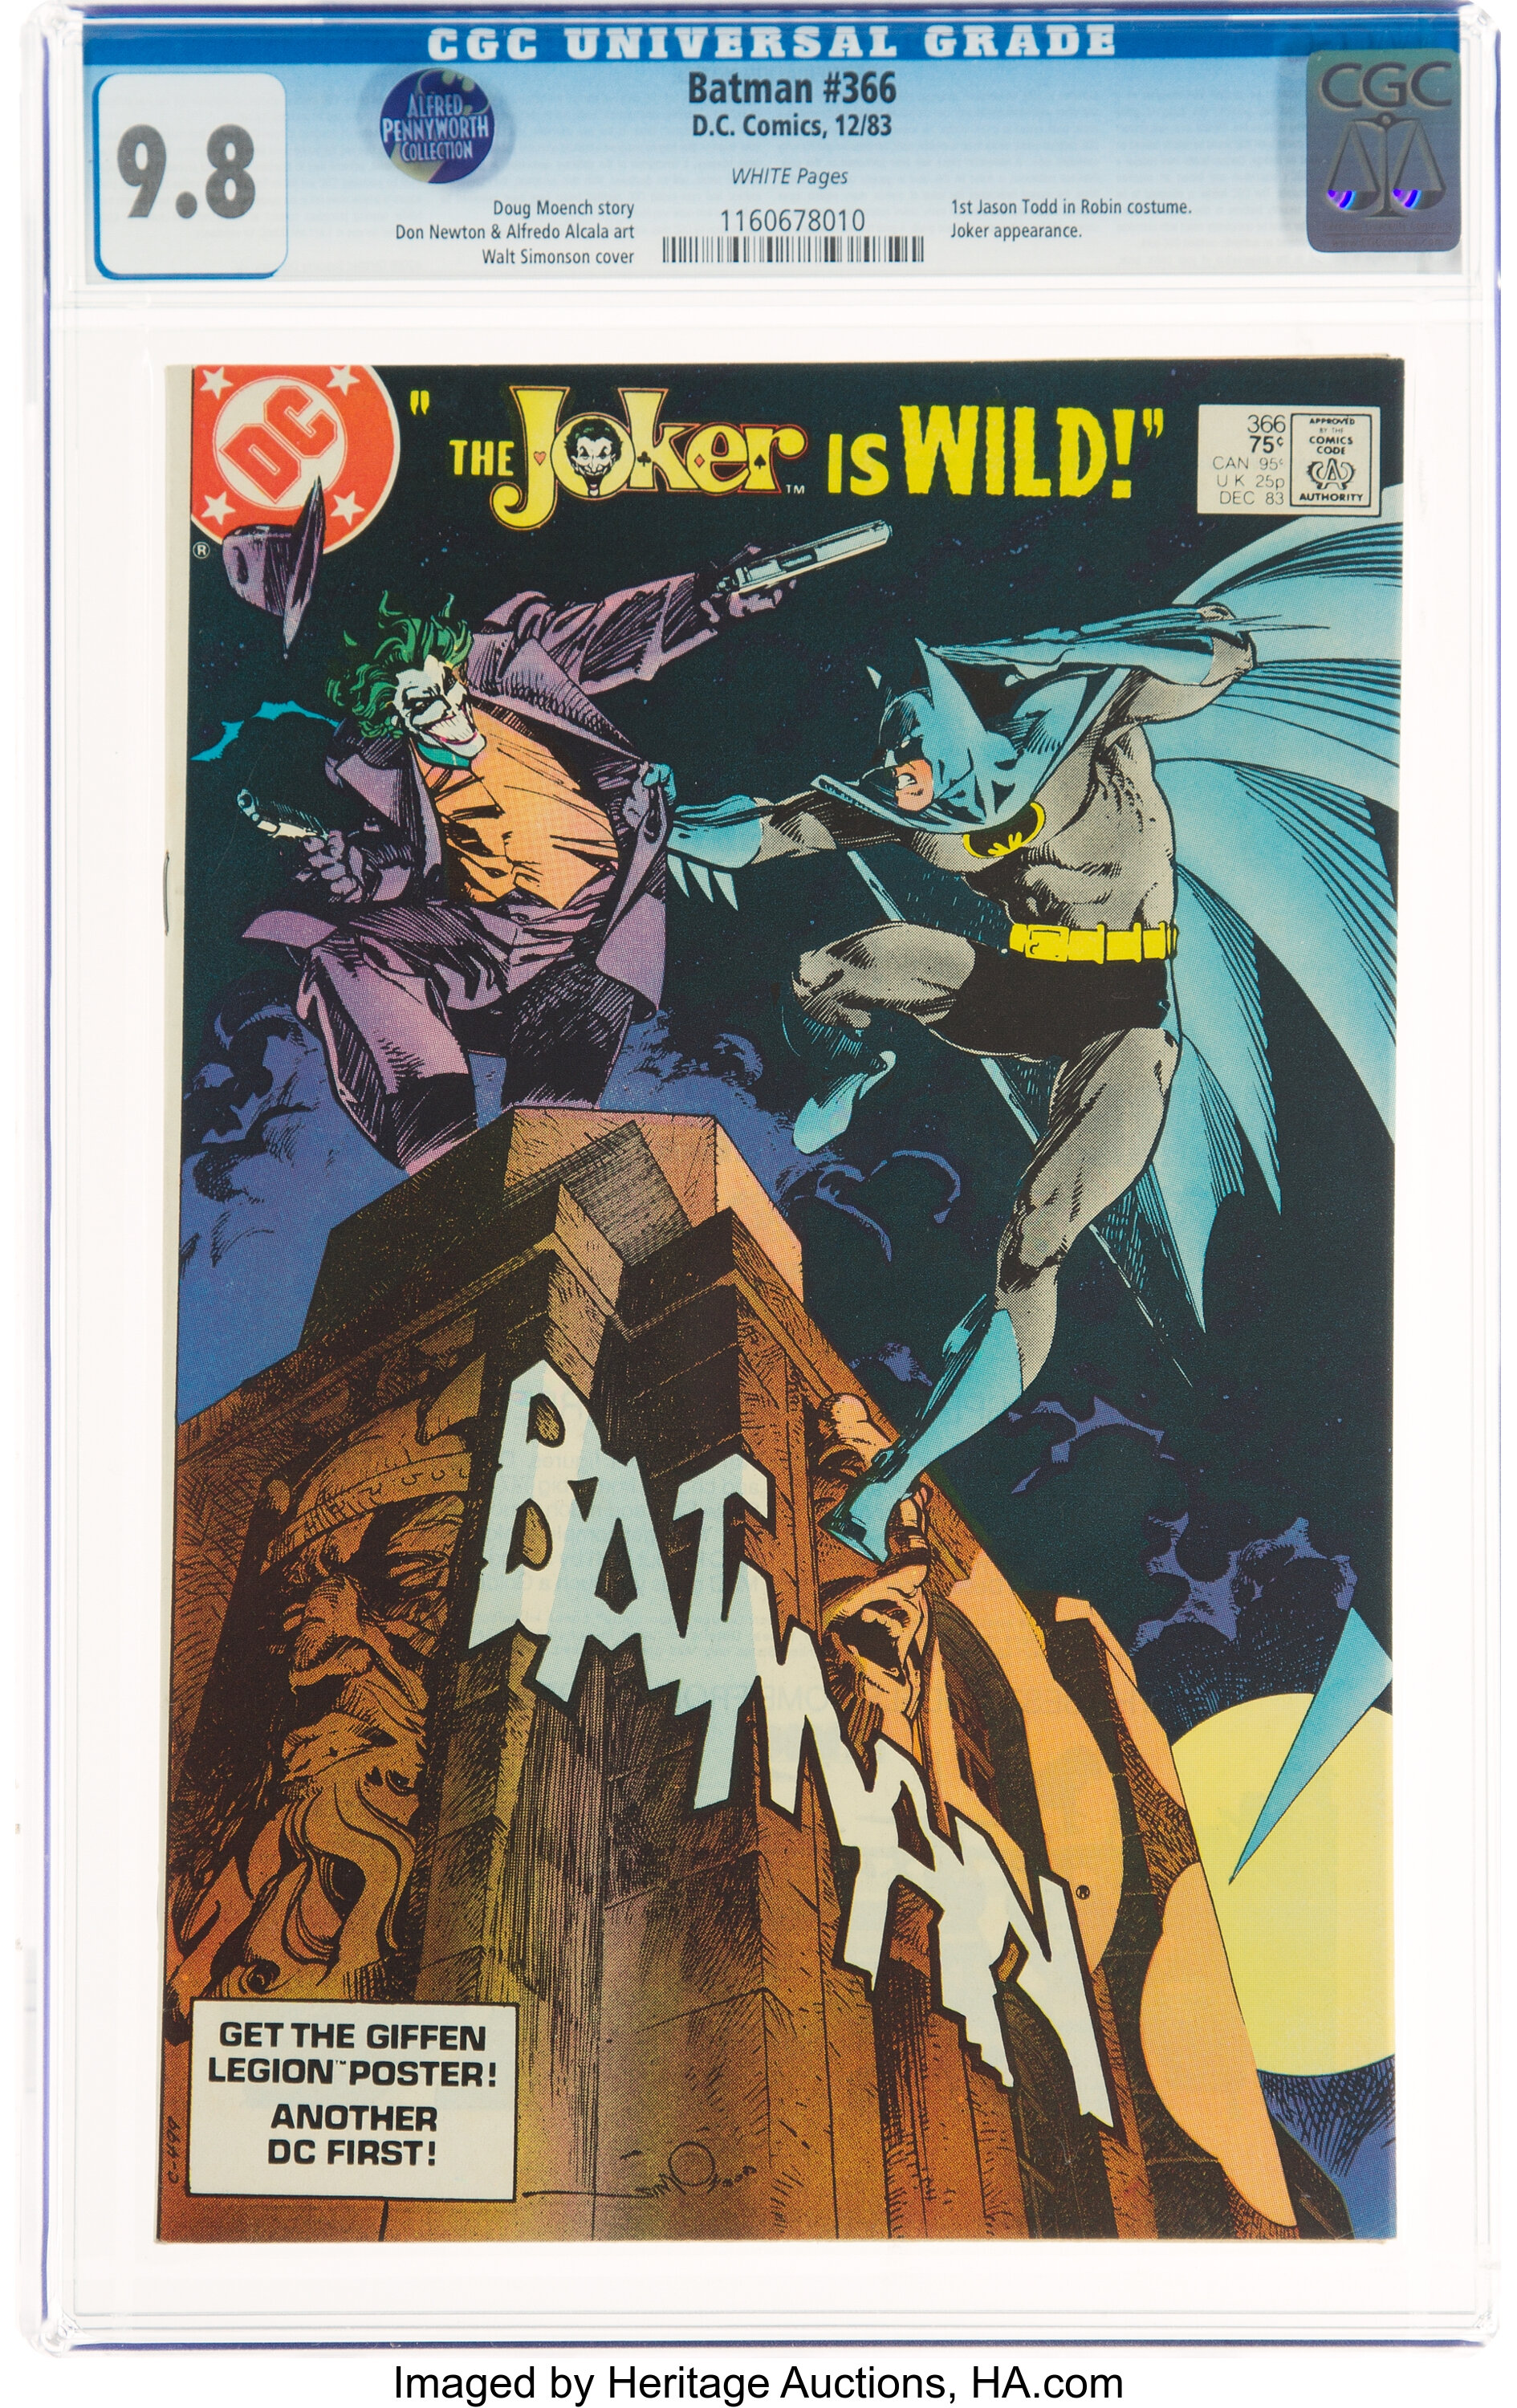 How Much Is Batman #366 Worth? Browse Comic Prices | Heritage Auctions